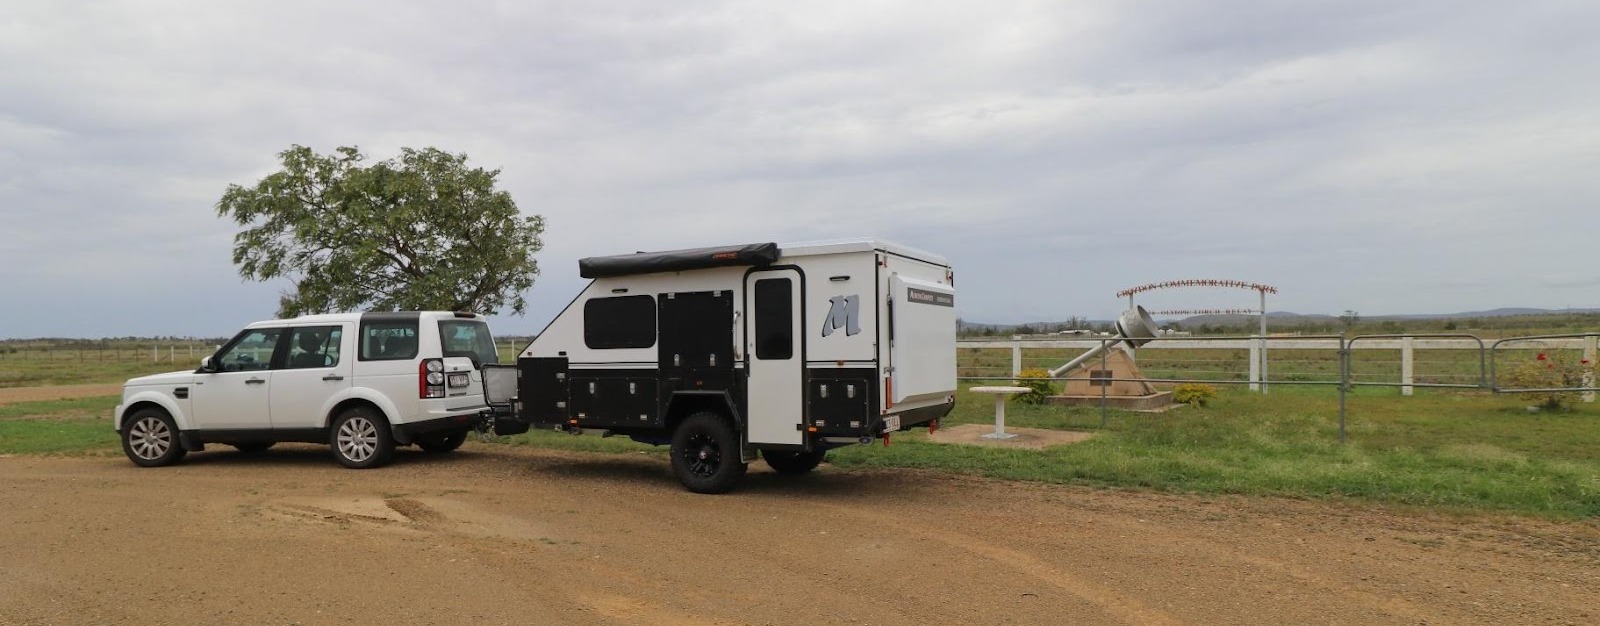 Towing tips for your new hybrid camper_IMG